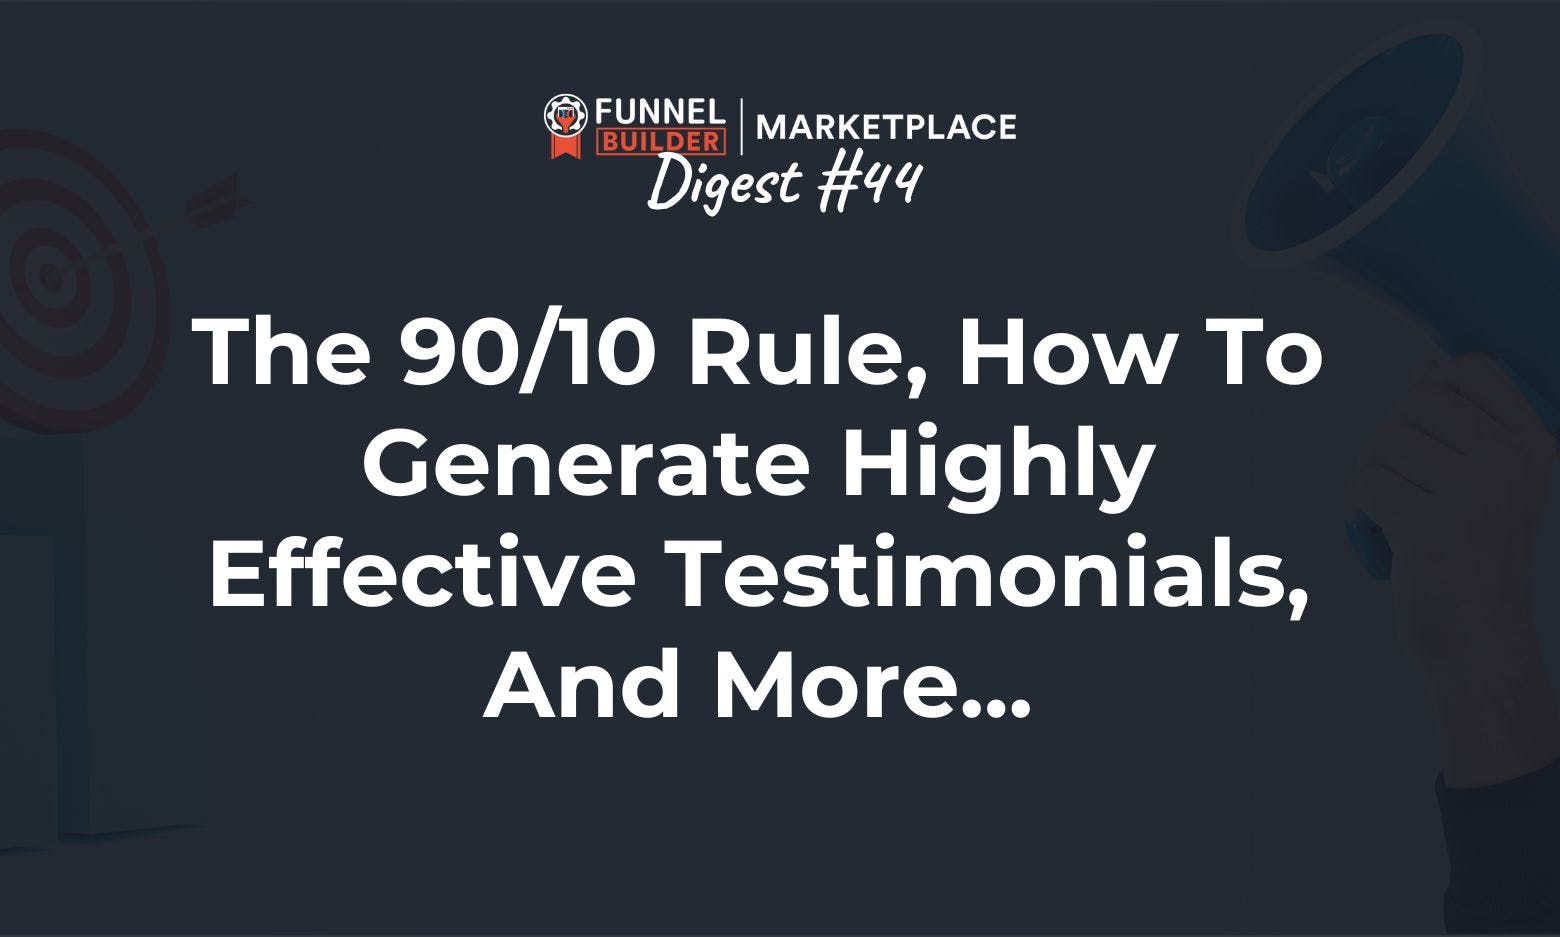 FBM Digest #44: The 90/10 Rule, how to generate highly effective testimonials, and more...